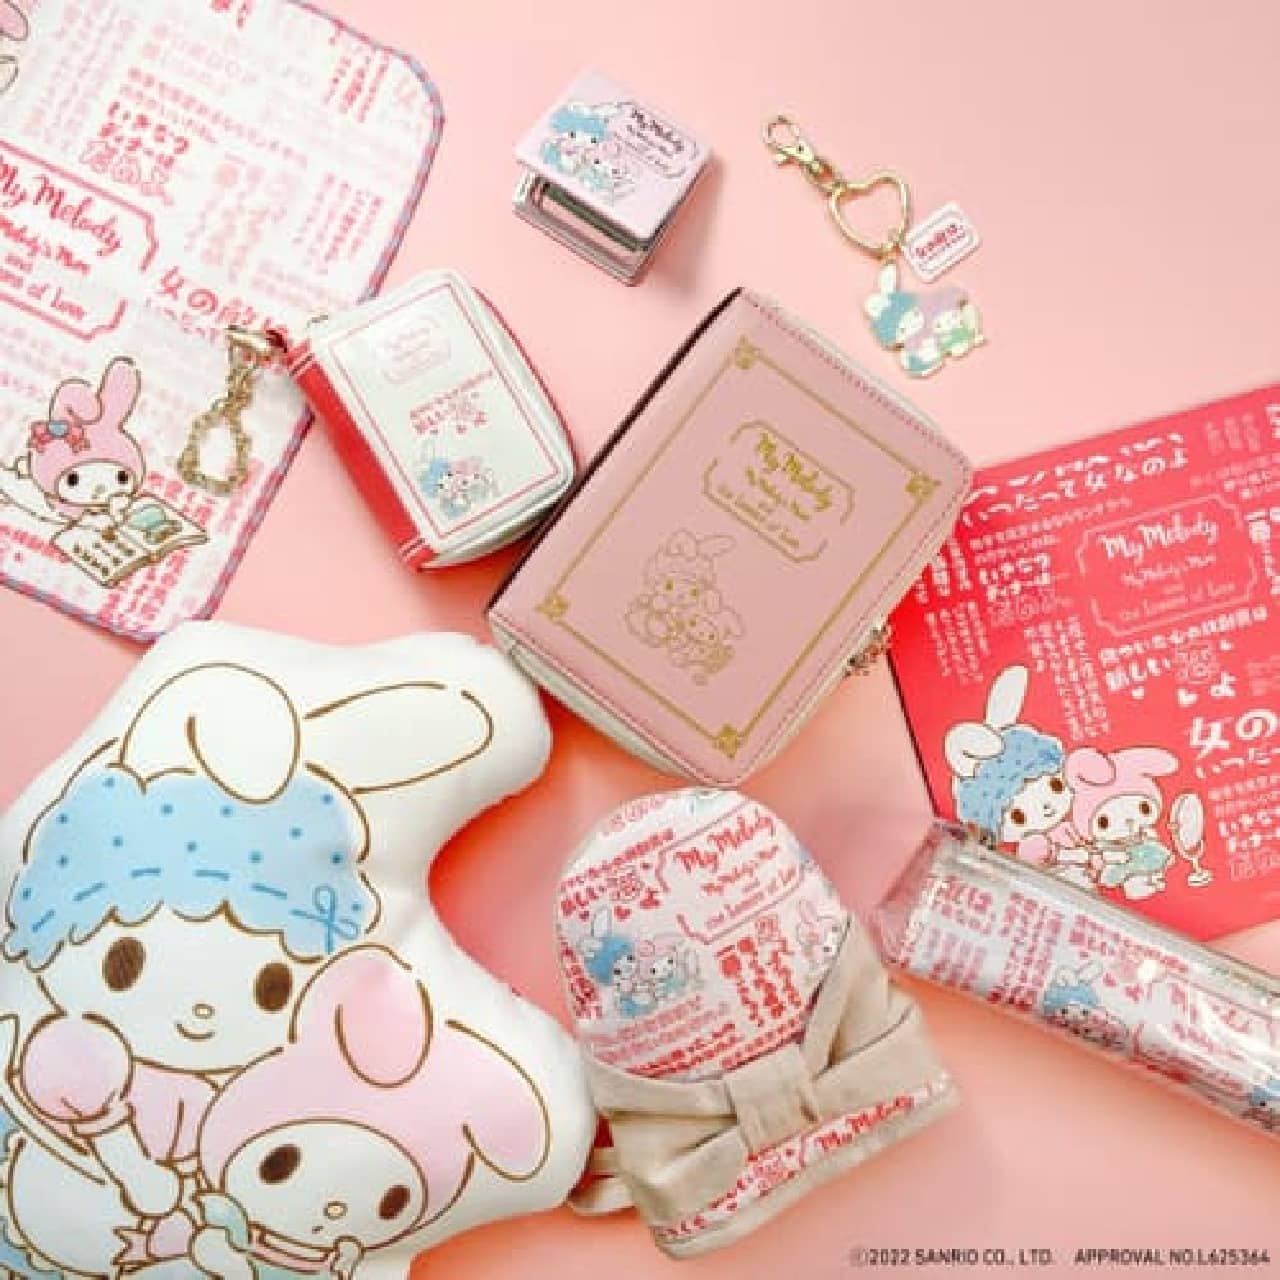 ITS’DEMO × My Melody Valentine's Day product --Chocolate pattern & My Melody mom pattern! Stationery, pouch, etc.